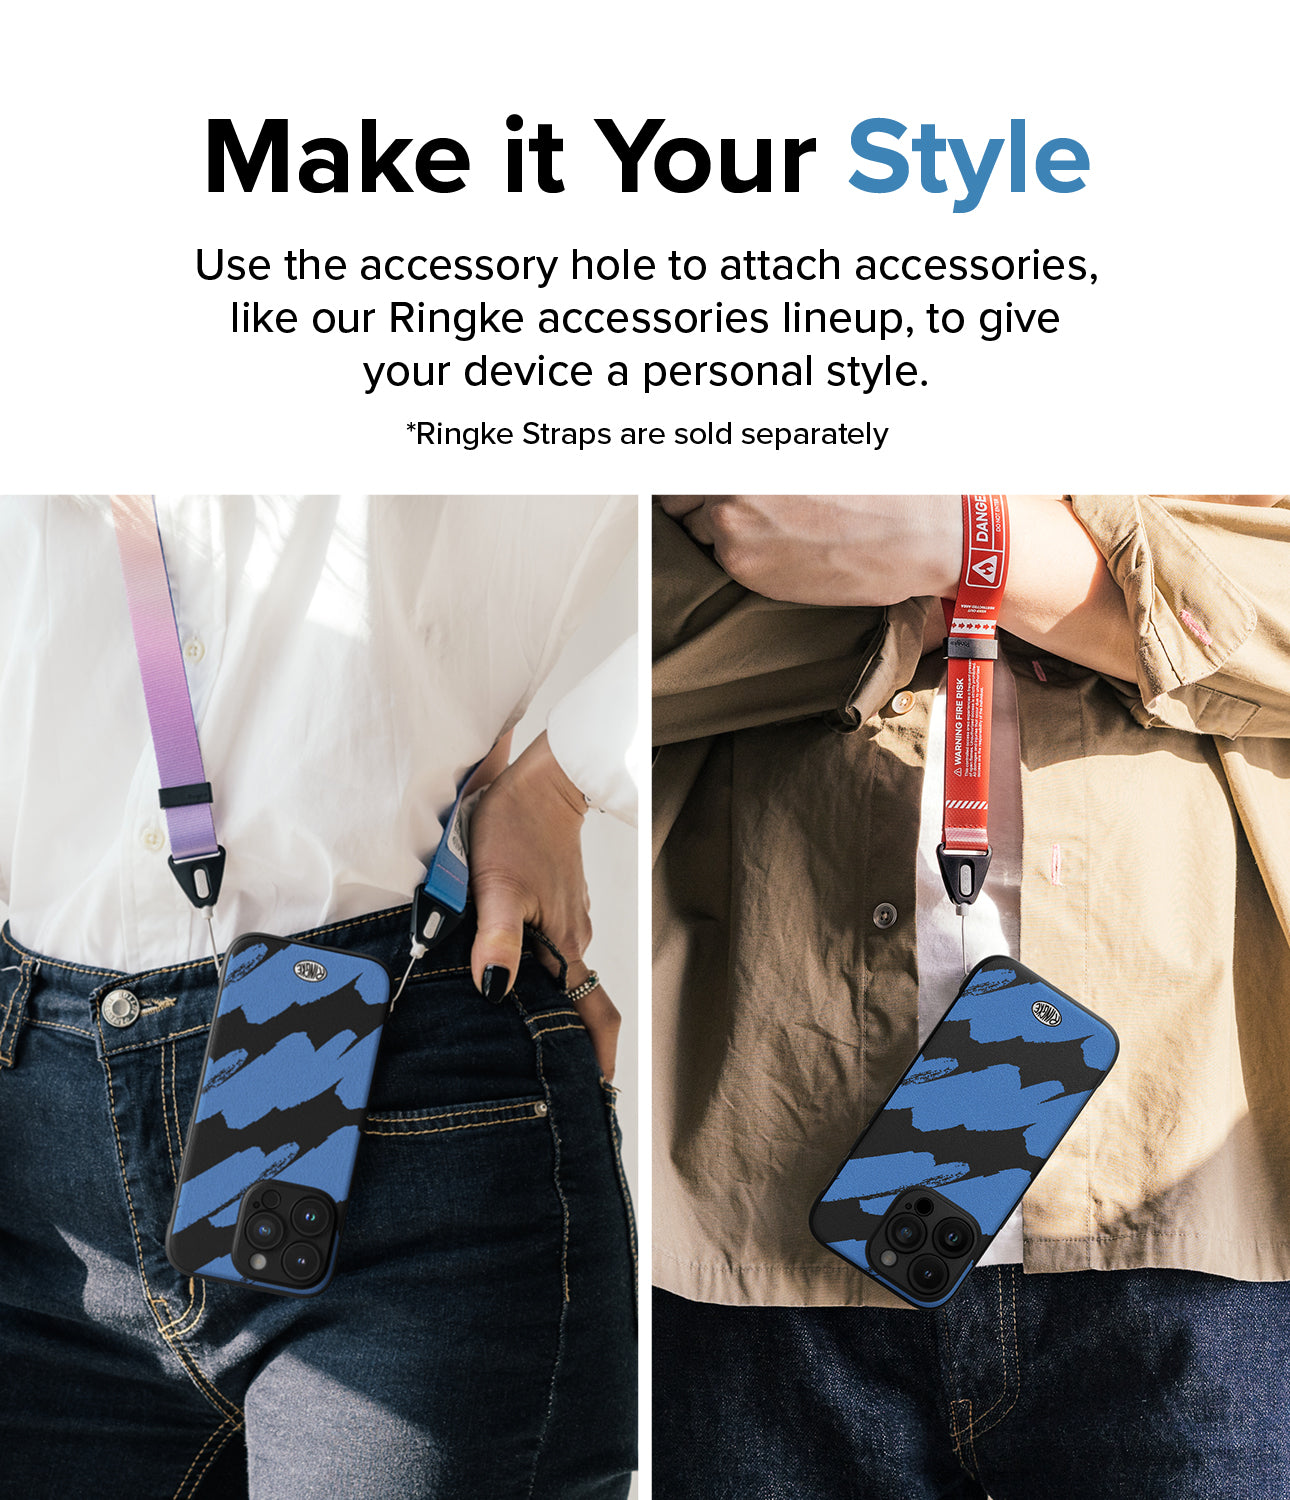 iPhone 15 Pro Max Case | Onyx Design - Blue Brush - Make it Your Style. Use the accessory hole to attach accessories, like our Ringke accessories lineup, to give your device a personal style.